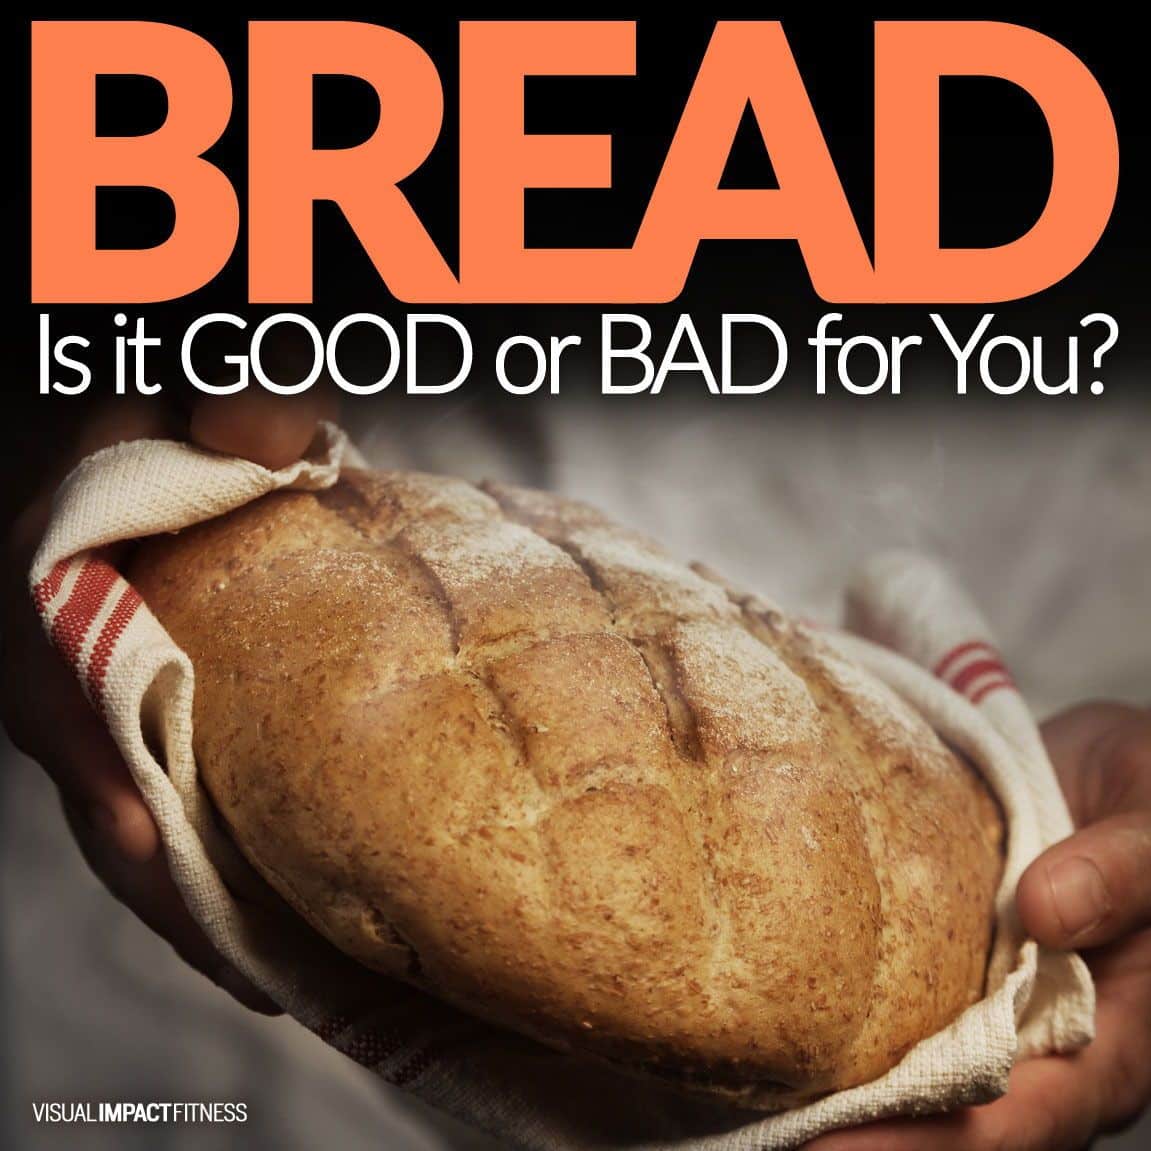 Is Bread Bad for You (Why Popular Opinion on Bread Is Wrong)